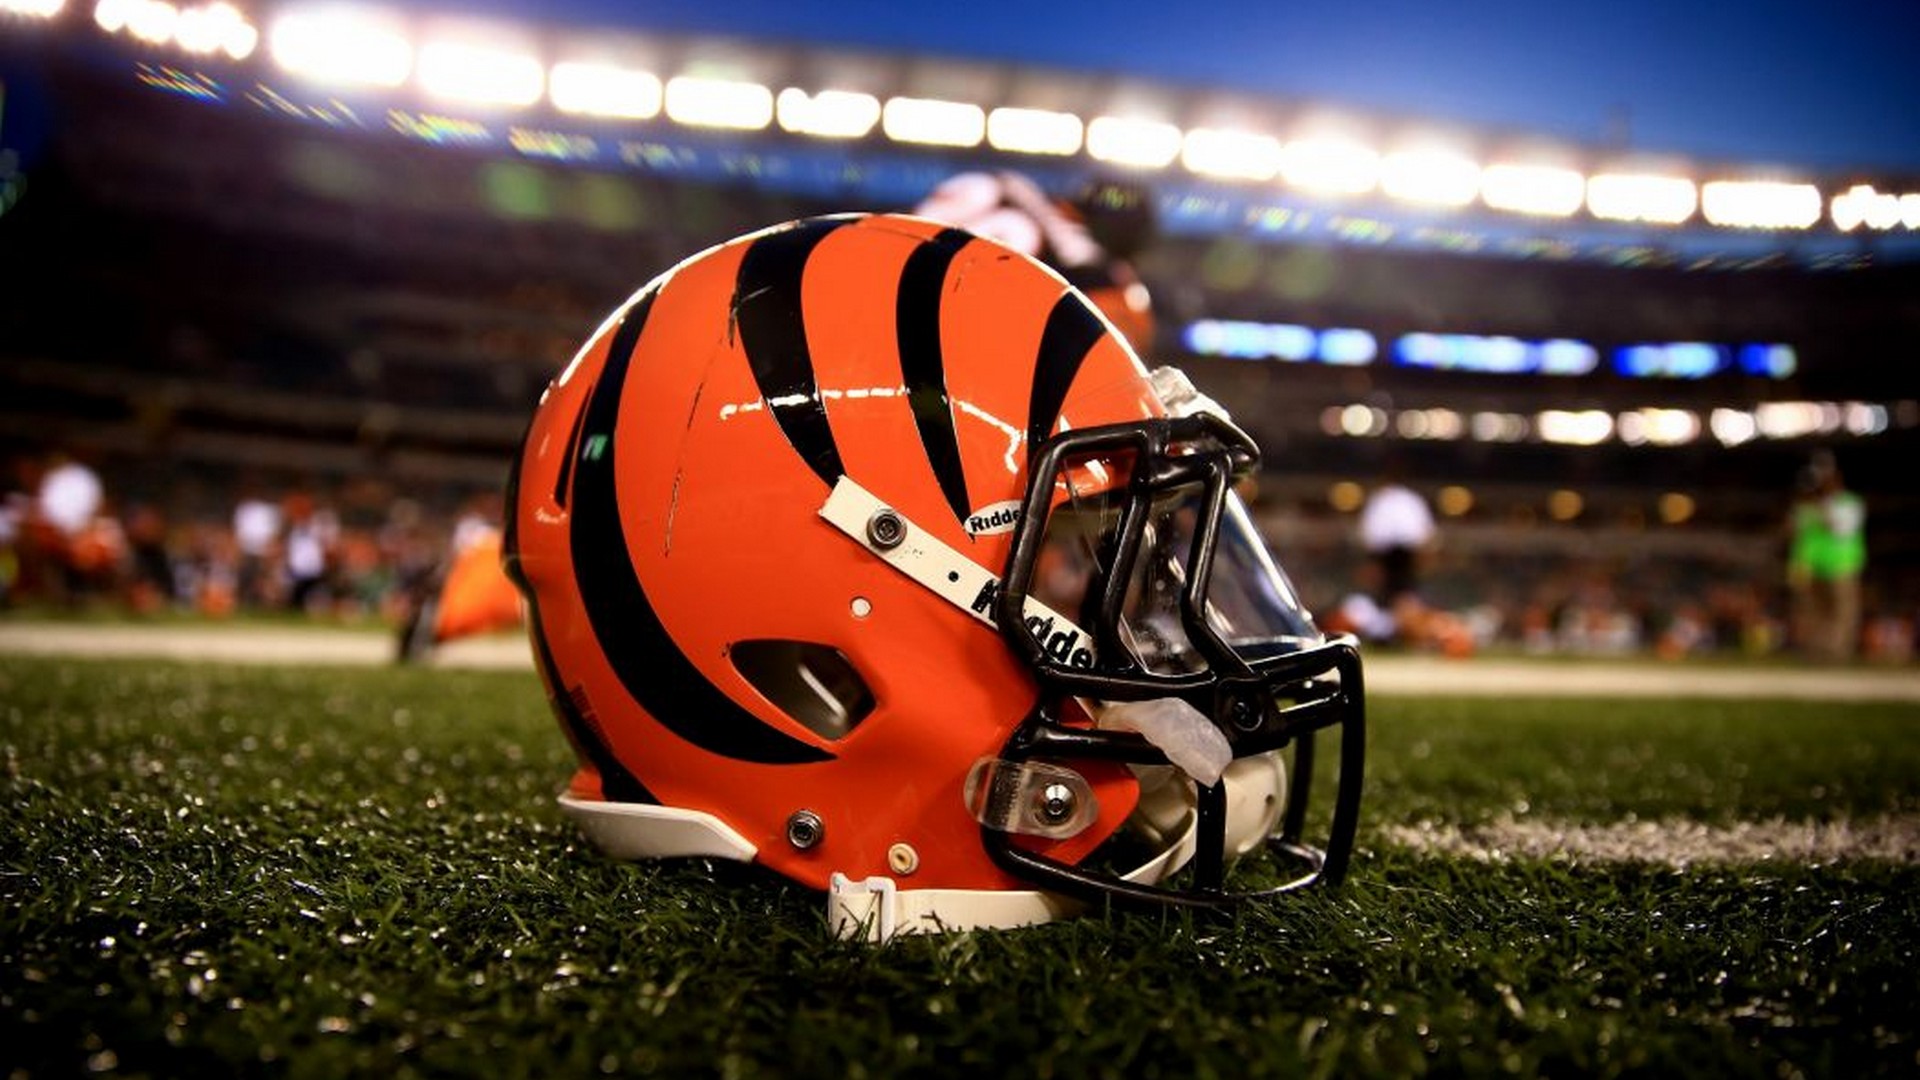 Best Cincinnati Bengals Wallpaper in HD With high-resolution 1920X1080 pixel. Download and set as wallpaper for Desktop Computer, Apple iPhone X, XS Max, XR, 8, 7, 6, SE, iPad, Android